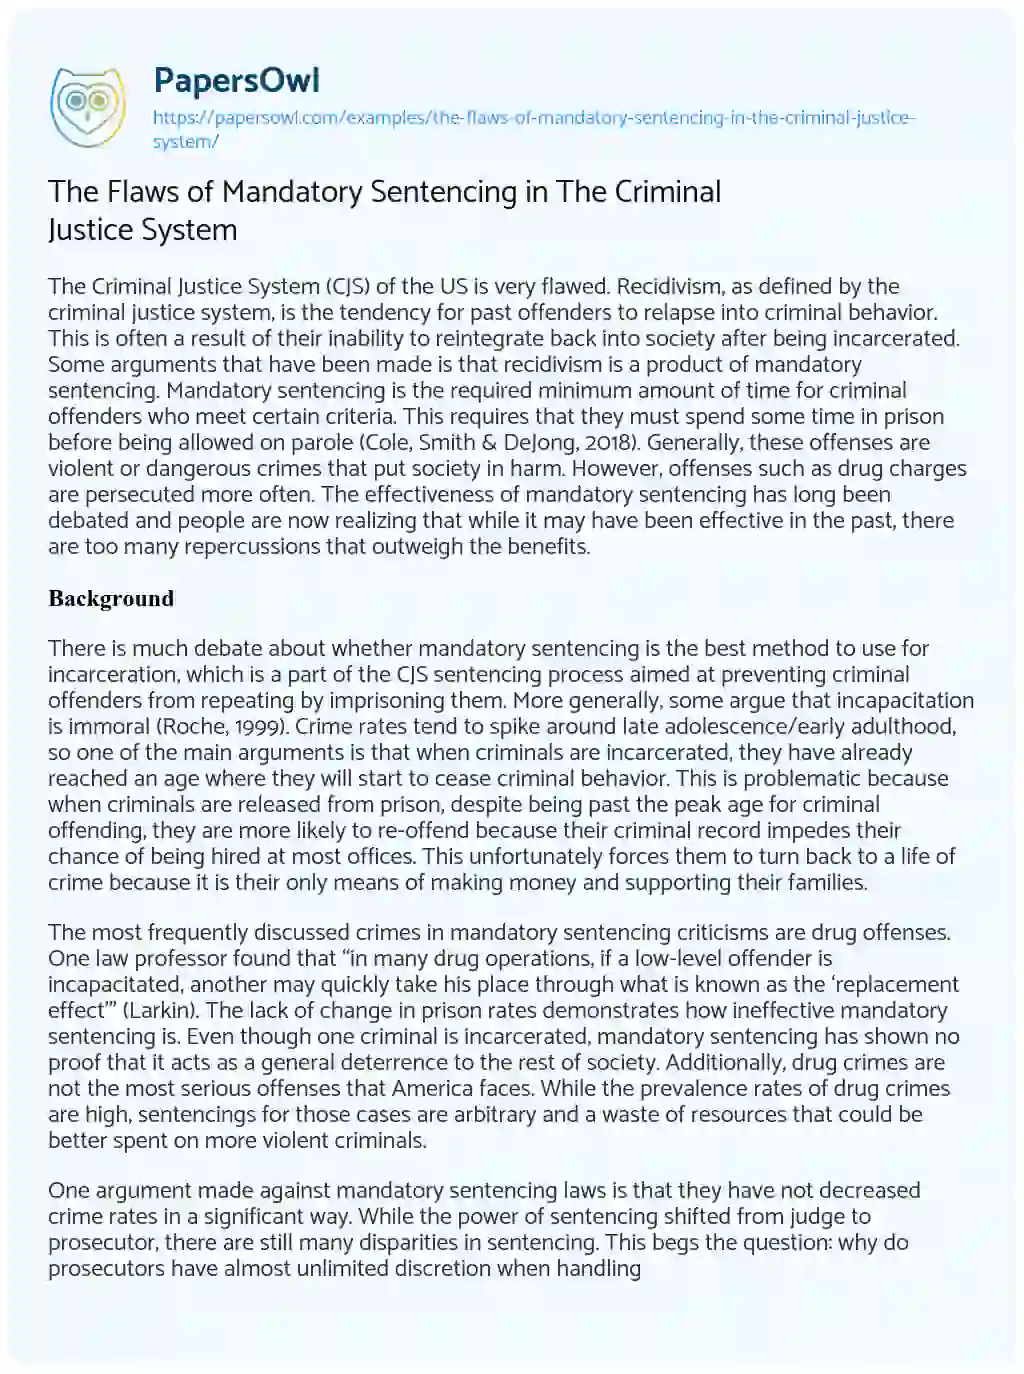 Essay on The Flaws of Mandatory Sentencing in the Criminal Justice System